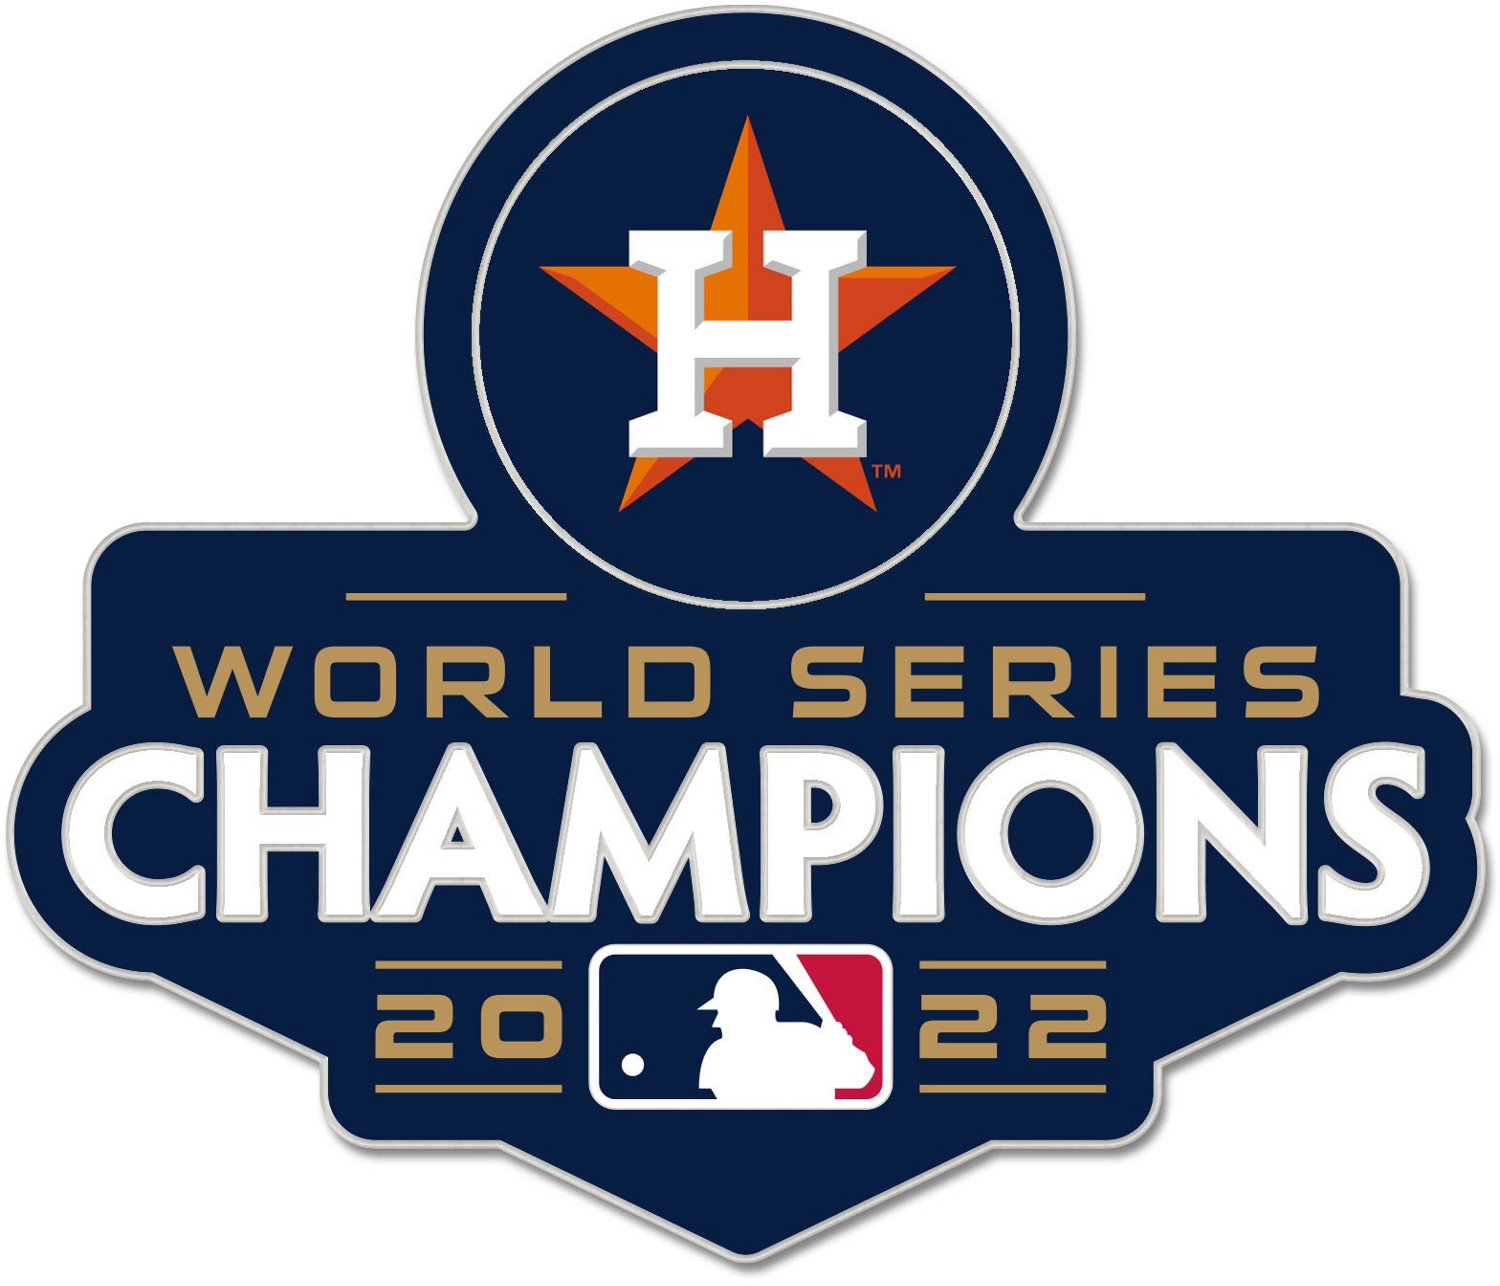 THE HOUSTON ASTROS ARE WORLD SERIES CHAMPIONS!!! - The Crawfish Boxes